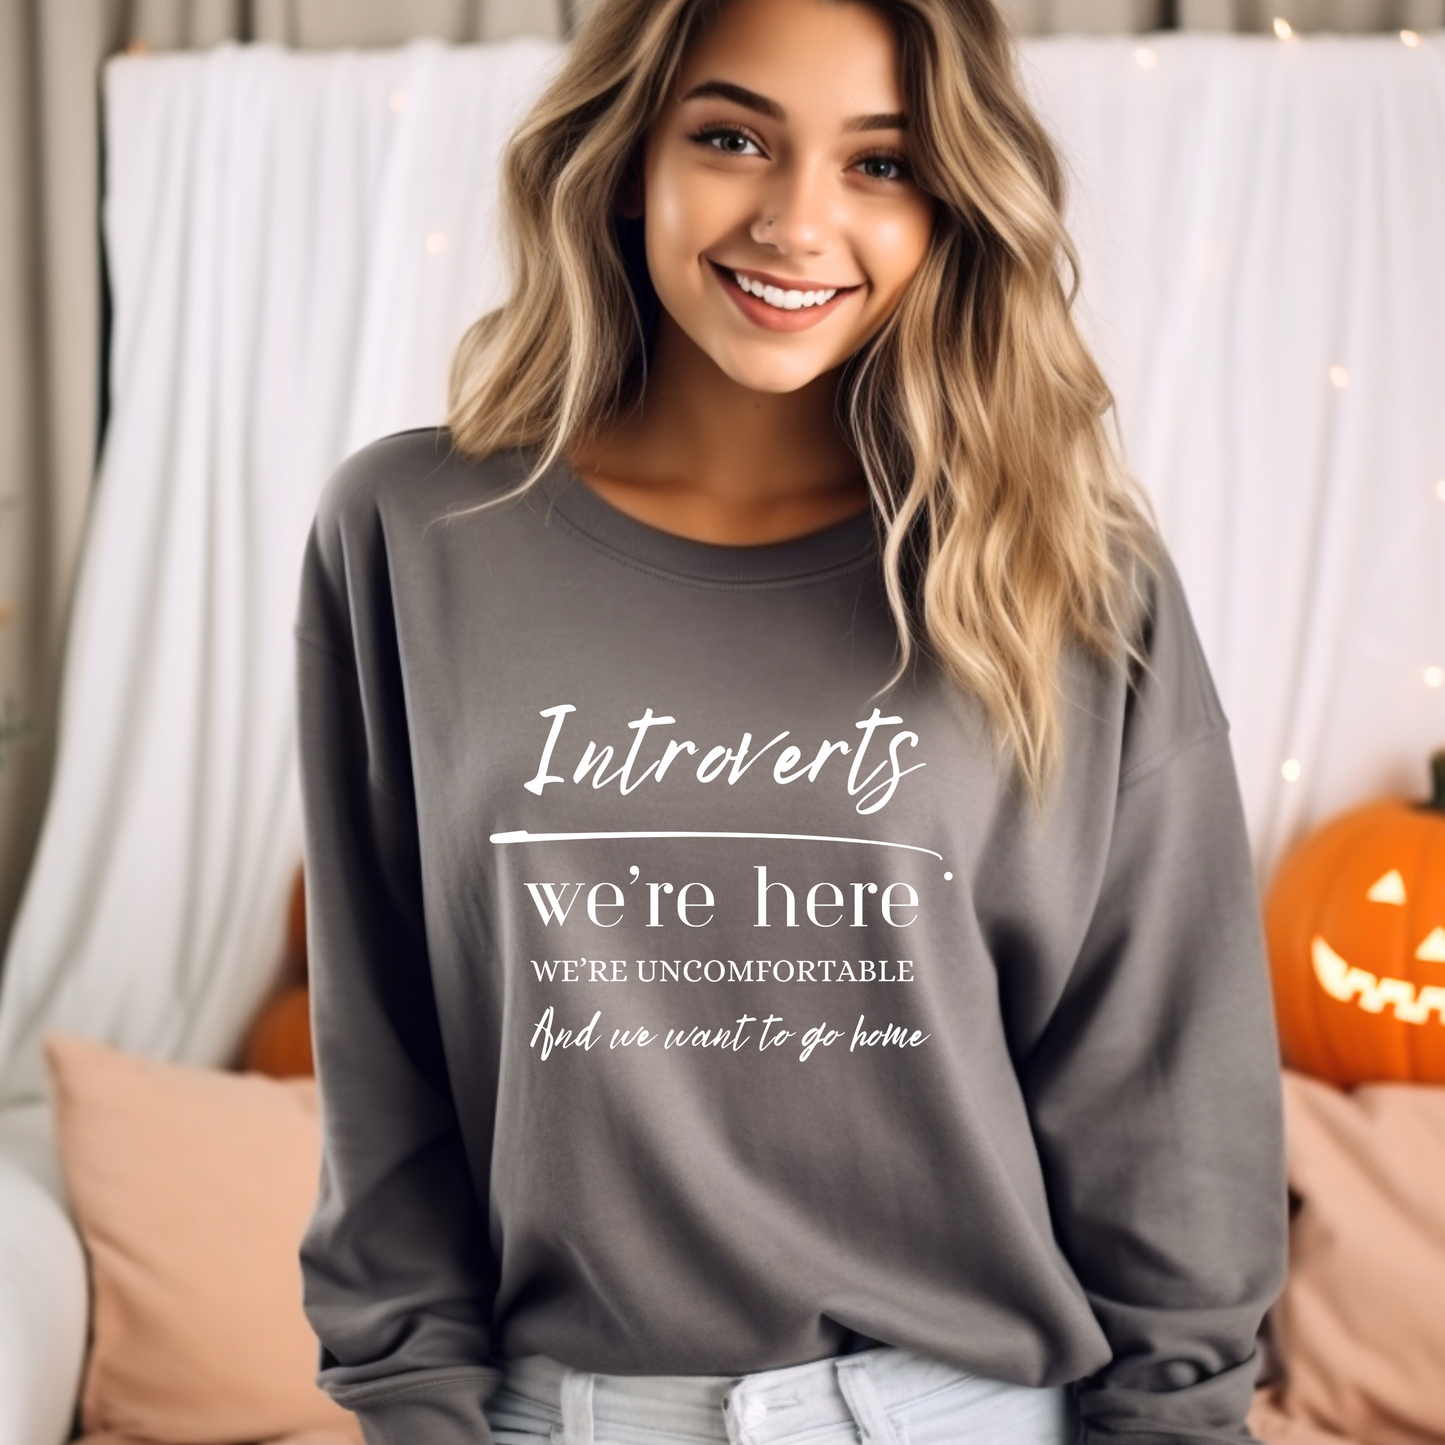 Cozy, Stylish, and Sarcastic Sweatshirt - Introverts: We’re Here, We’re Uncomfortable, We Want To Go Home